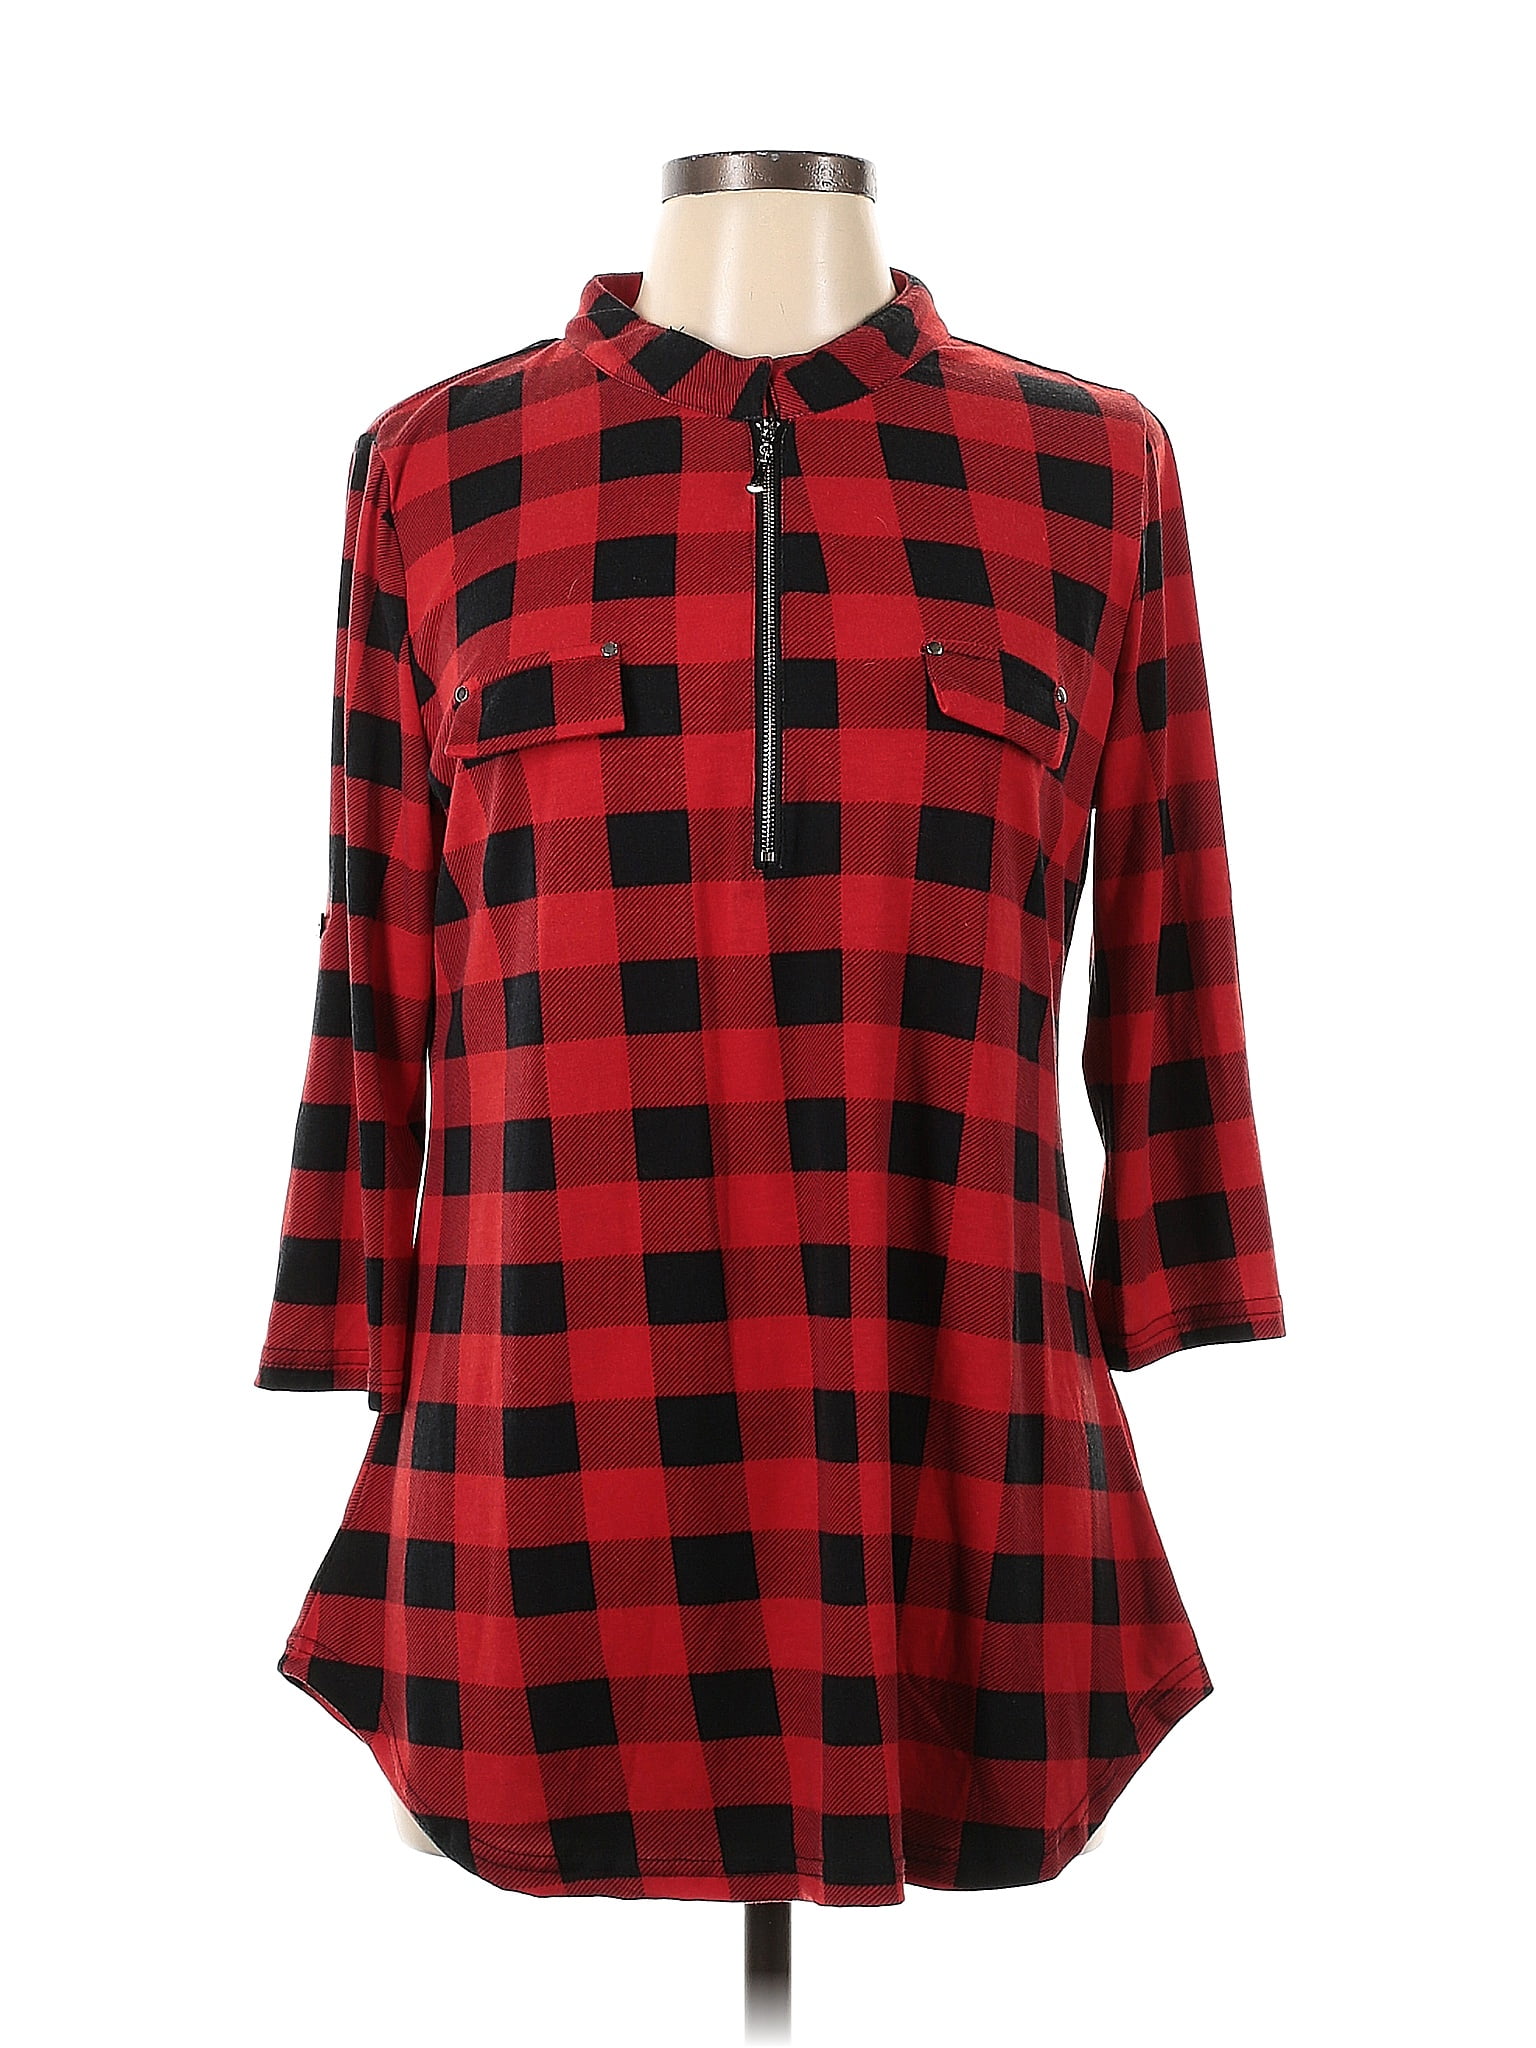 Ninedaily Women's 3/4 Sleeve Plaid Shirts Zip Floral Casual Tunic